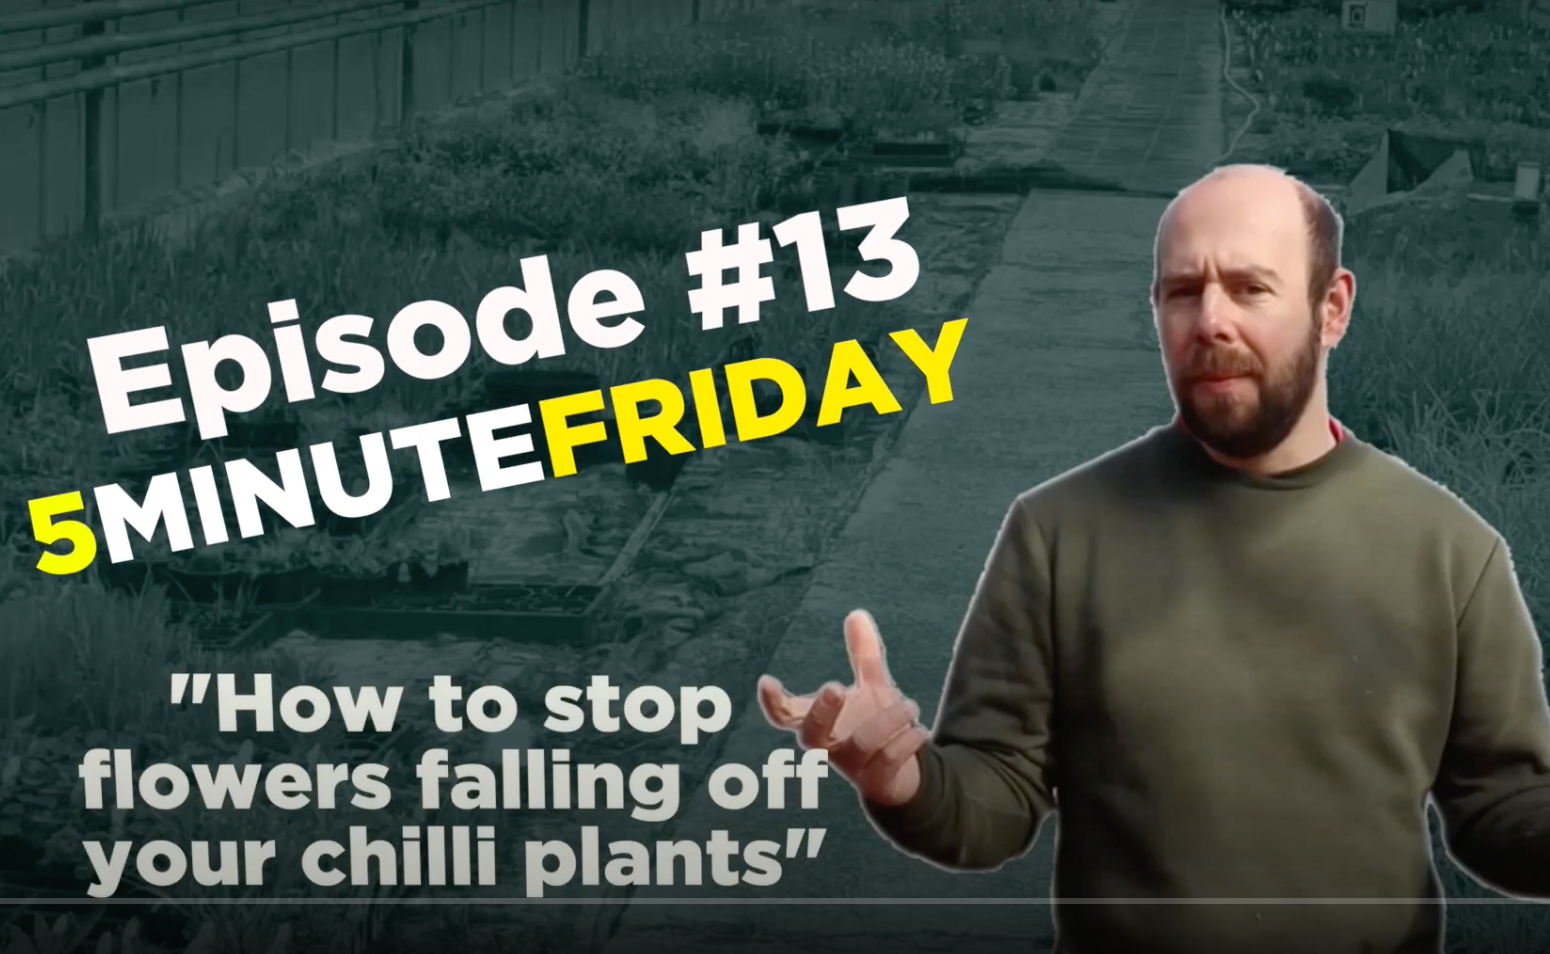 EP13 - Why are the flowers falling off your chilli plants? #5MINUTEFRIDAY